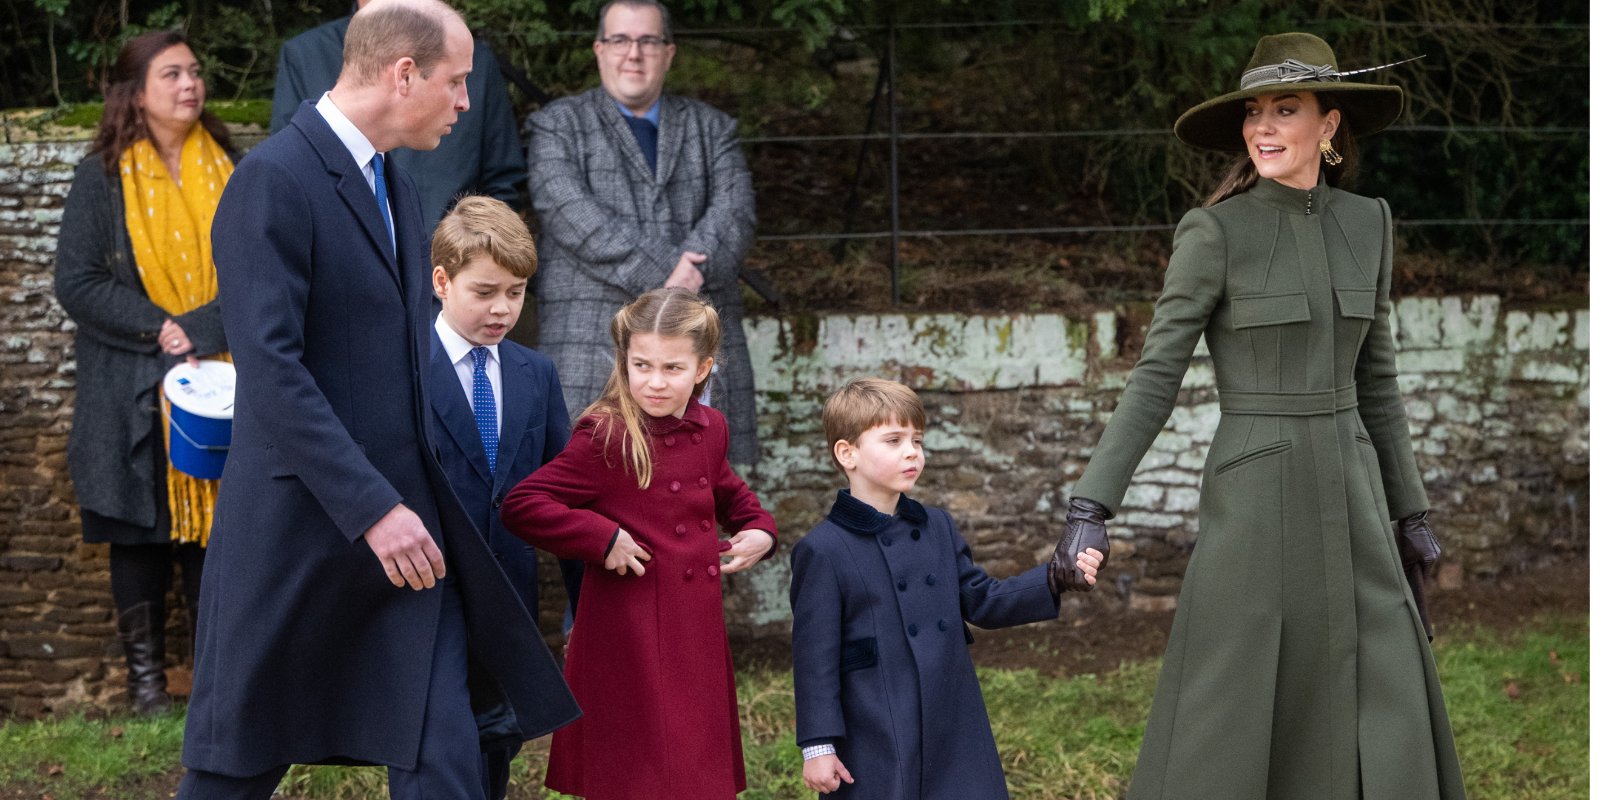 Prince William with his wife Kate Middleton and children Princes Louis and George and Princess Charlotte.